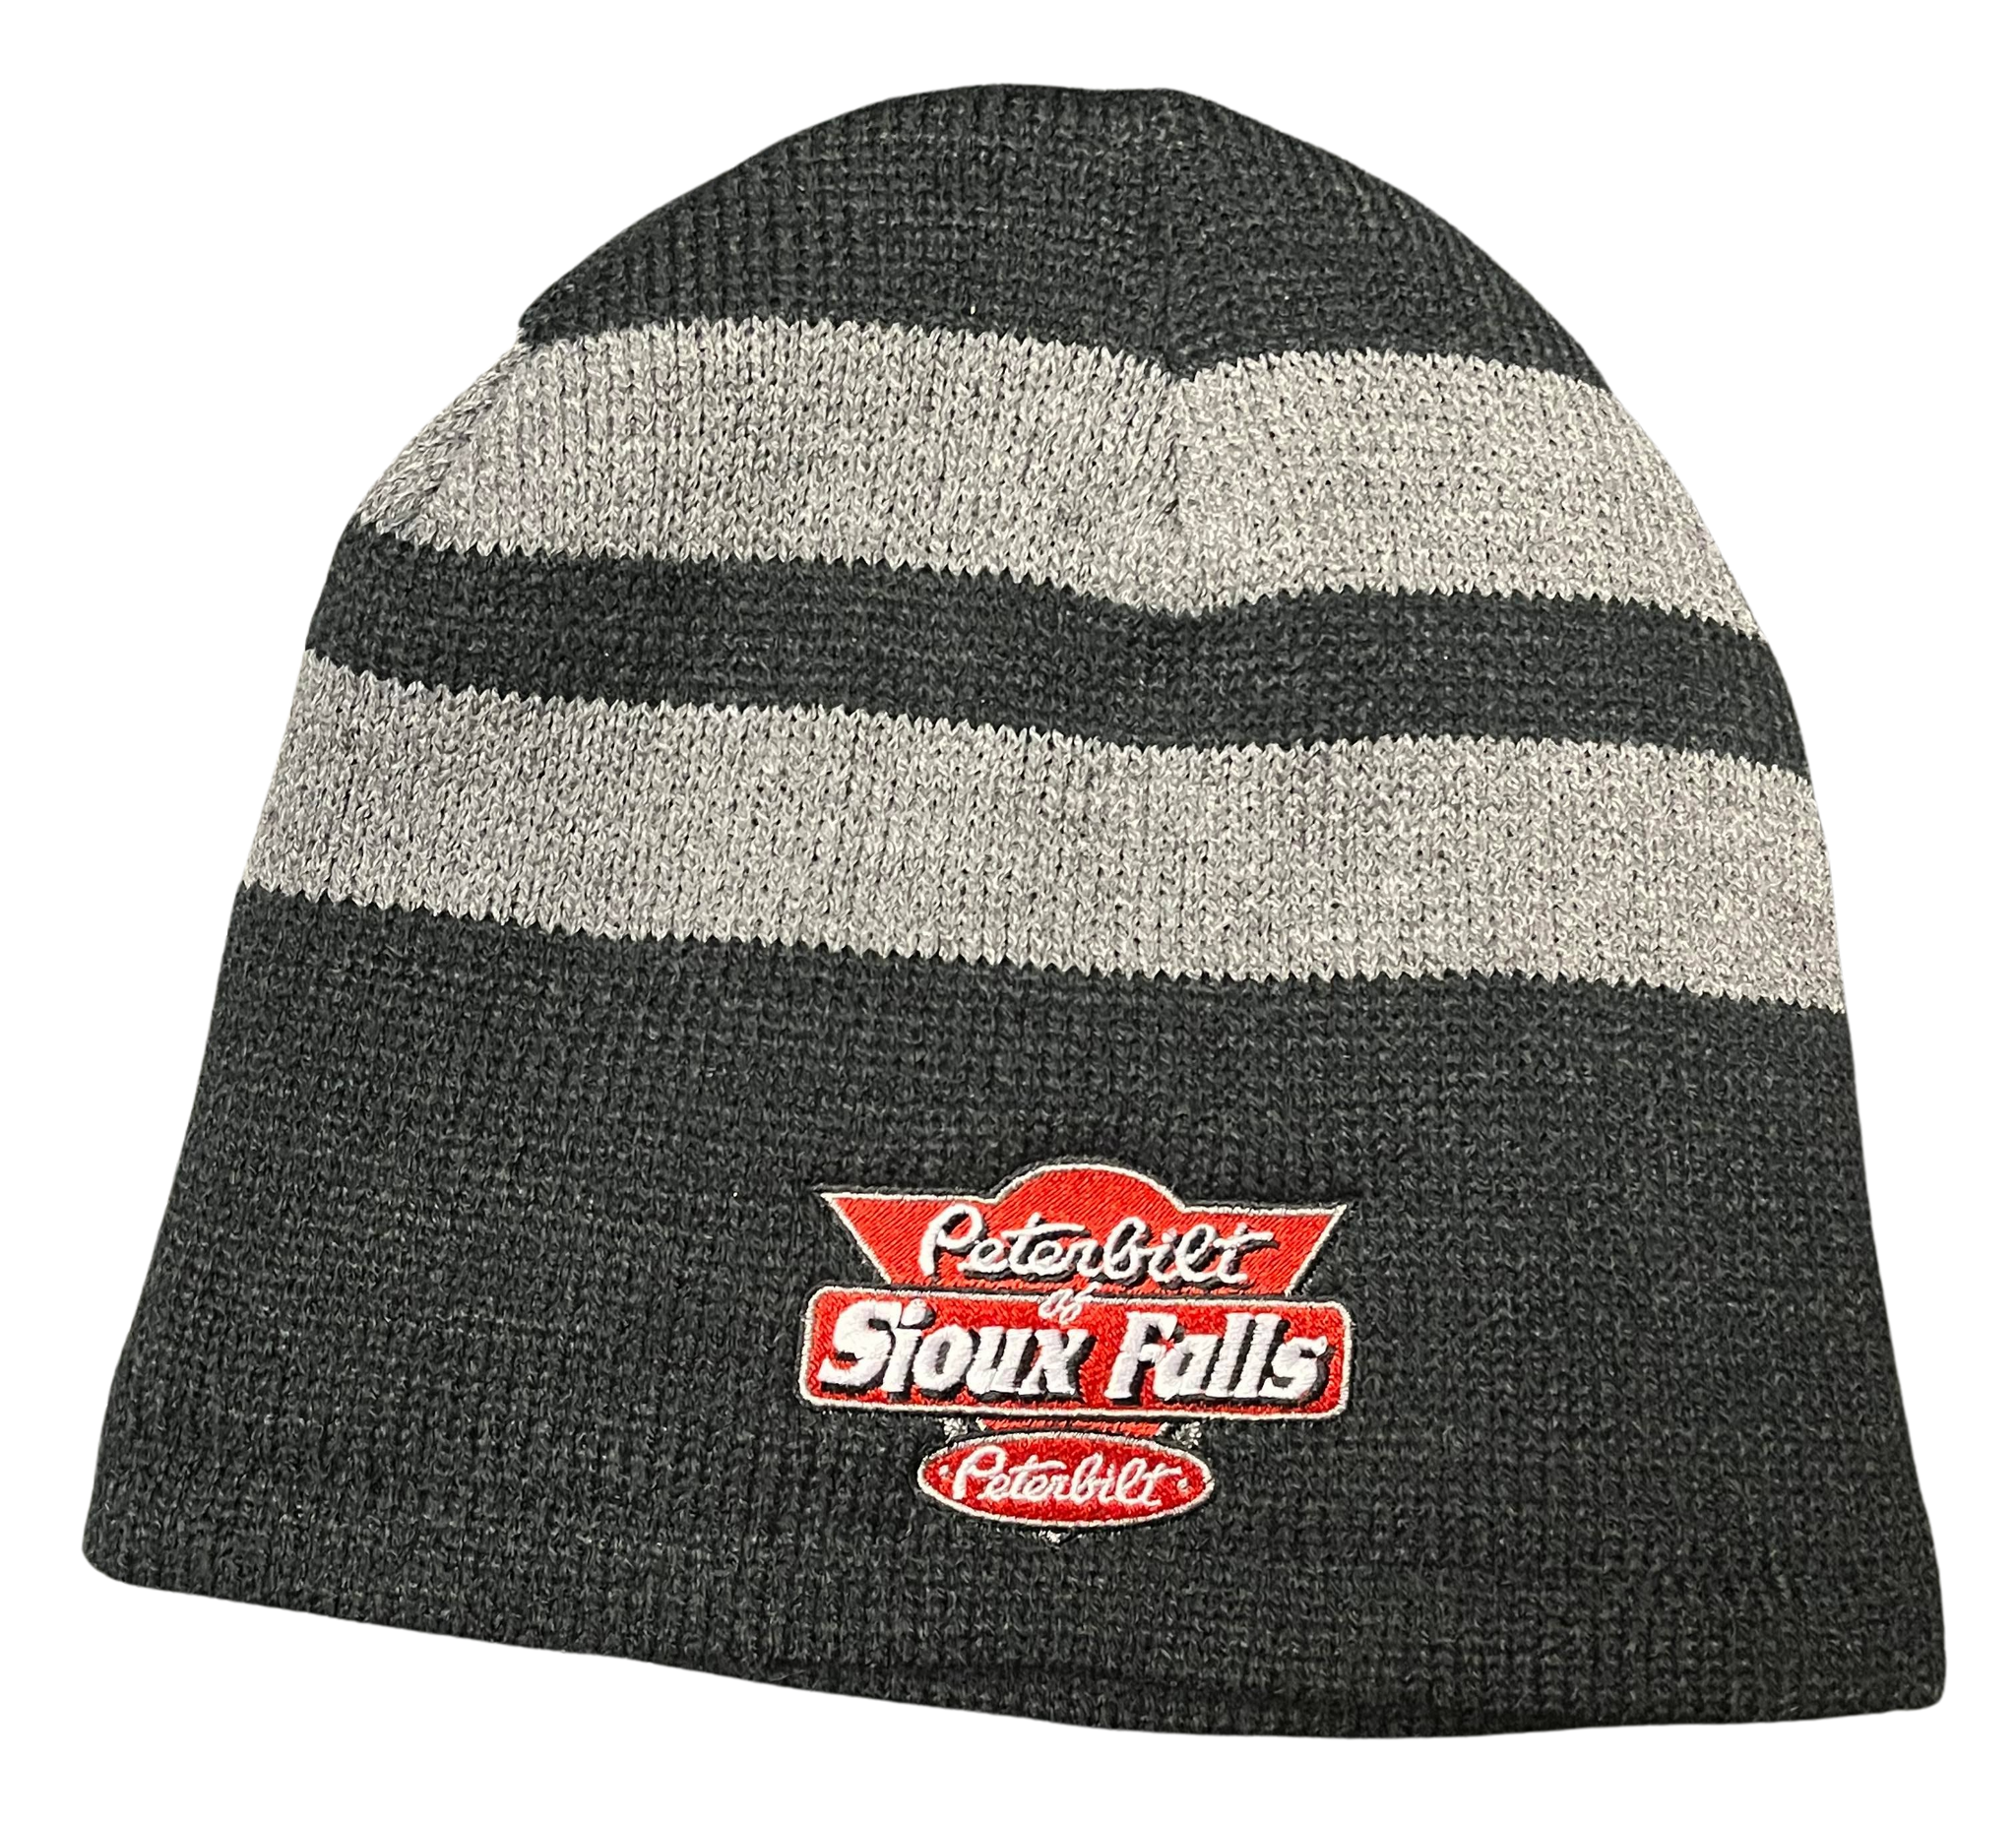 Black and Gray Striped Stocking Hat